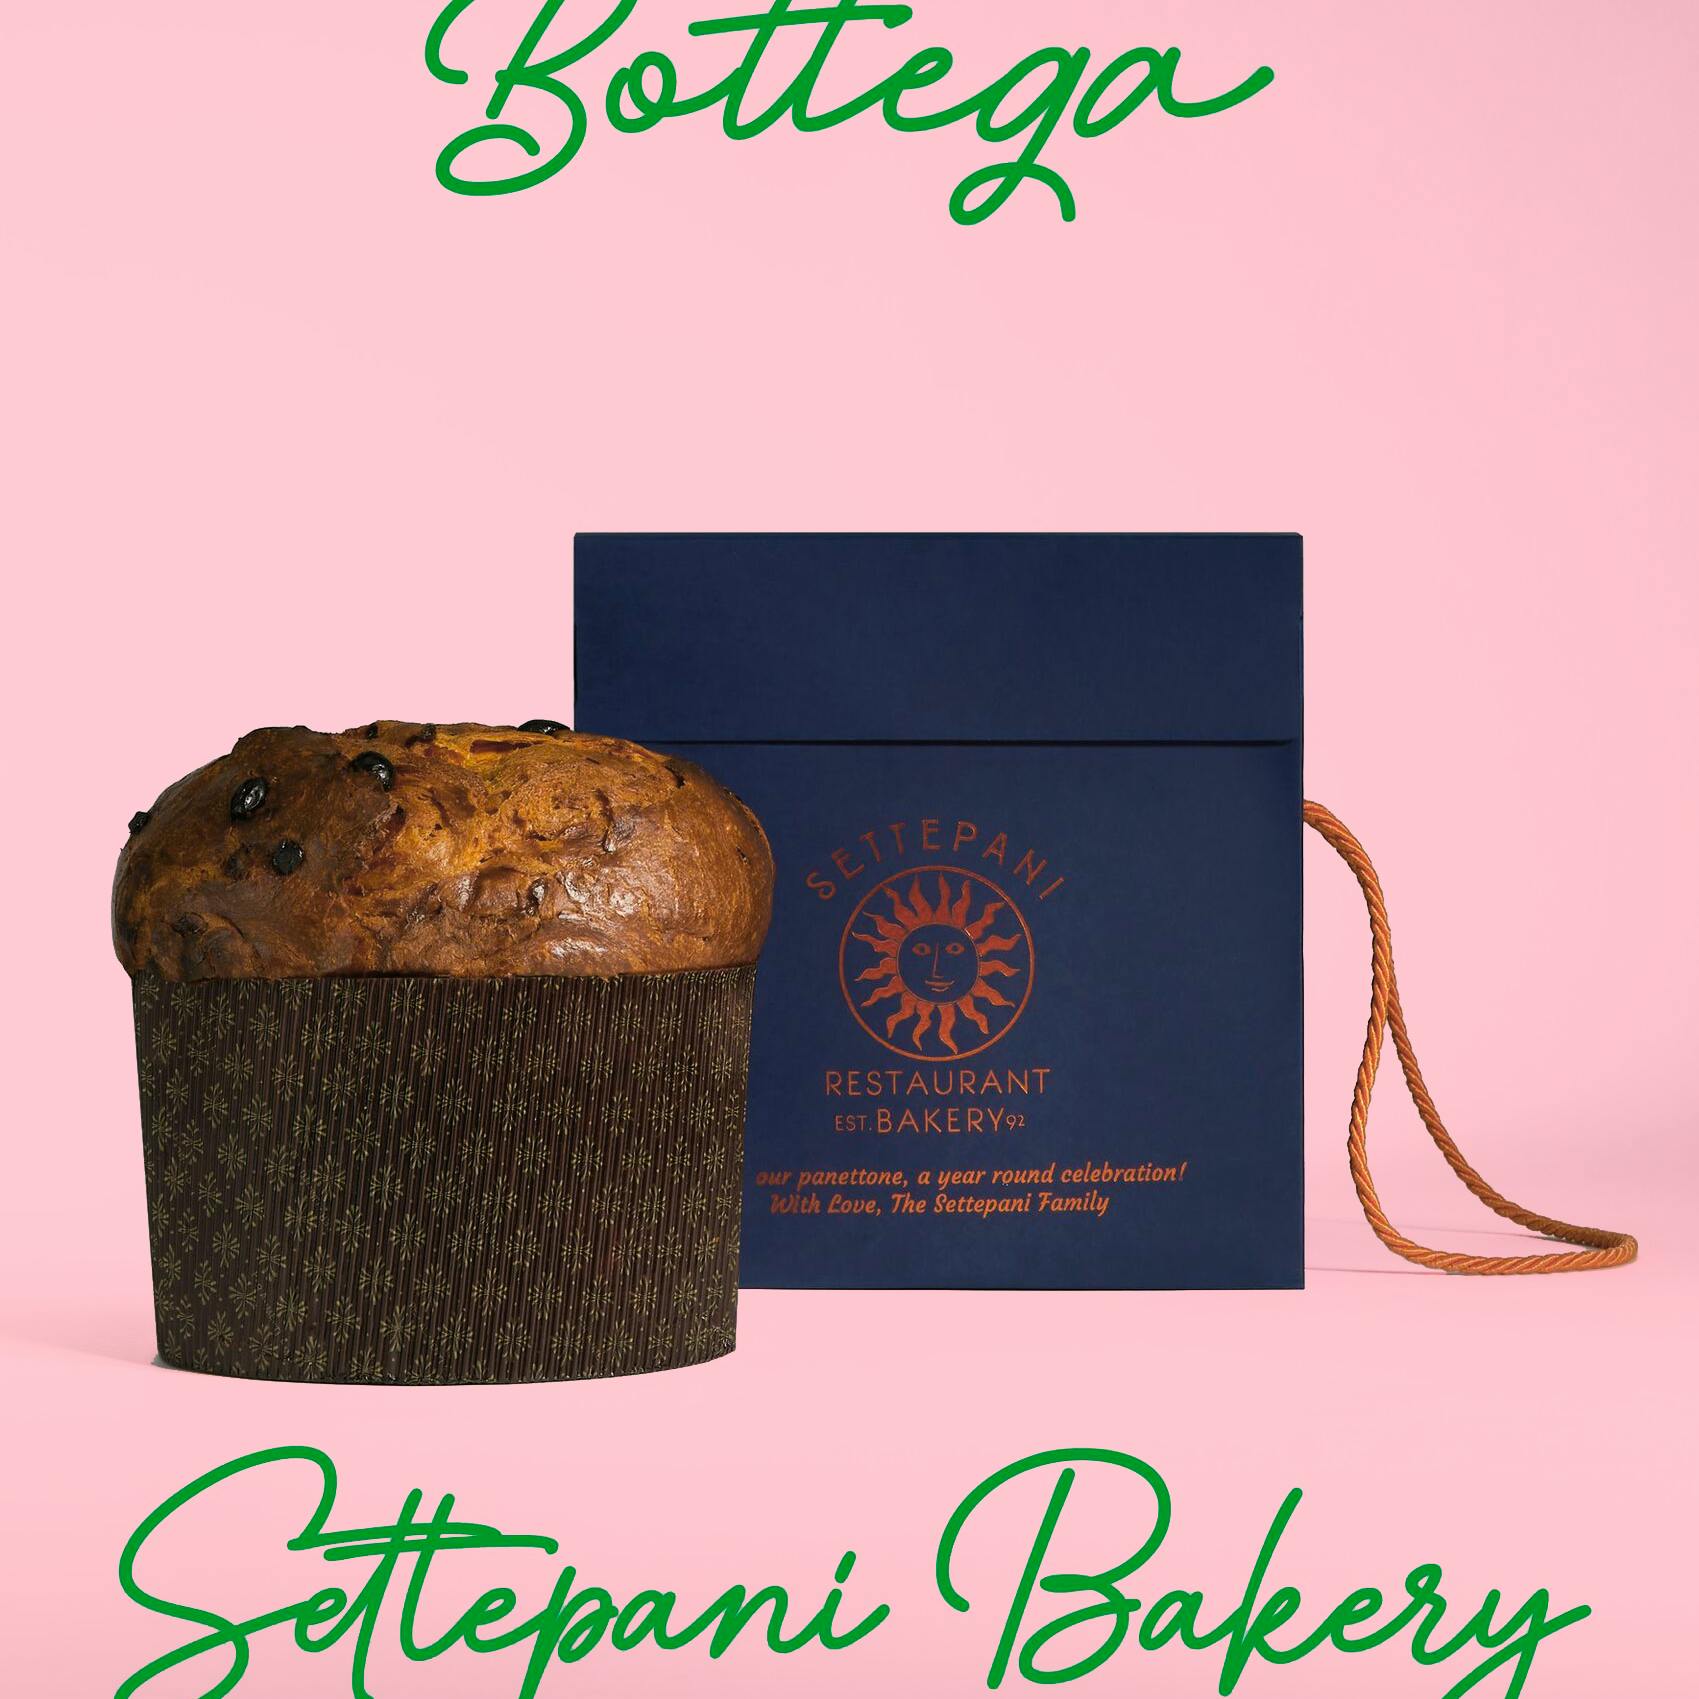 Traditional Milanese Panettone